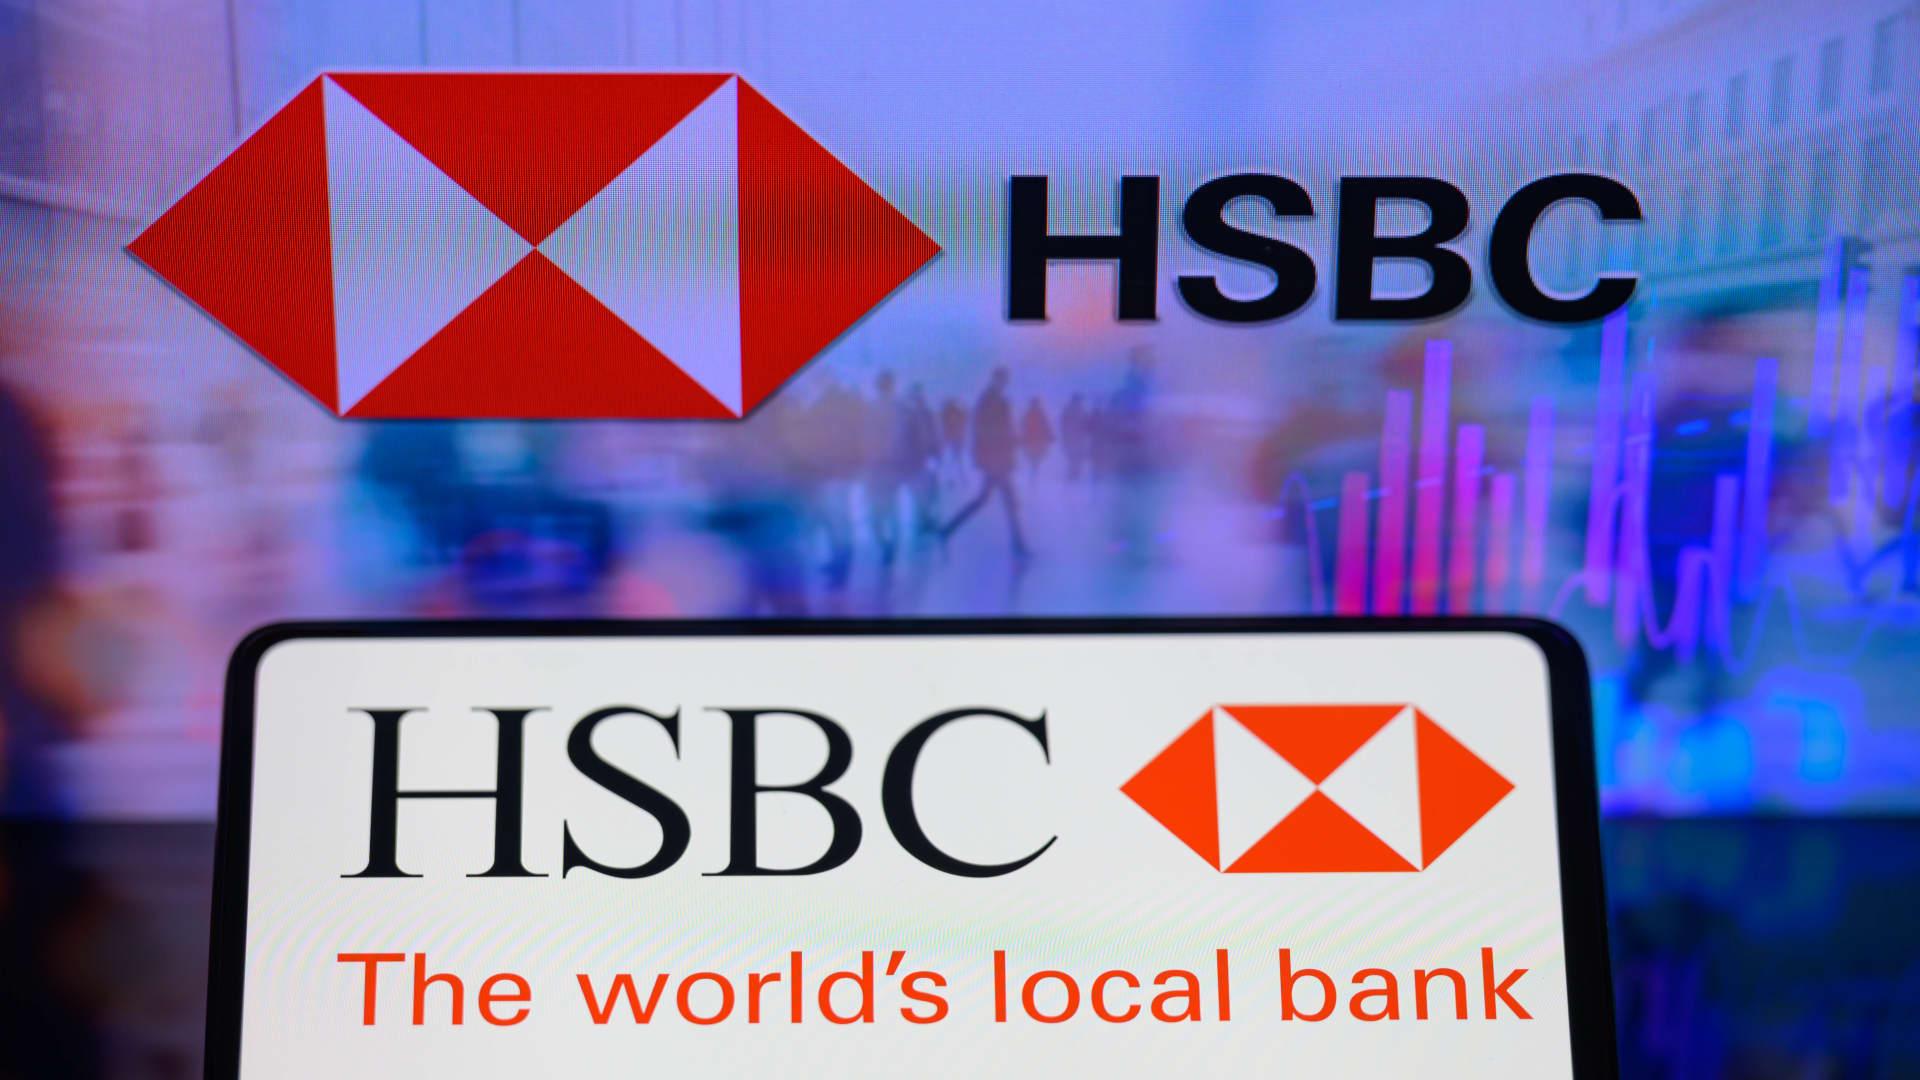 HSBC beats expectations in first quarter earnings; CEO Noel Quinn to retire